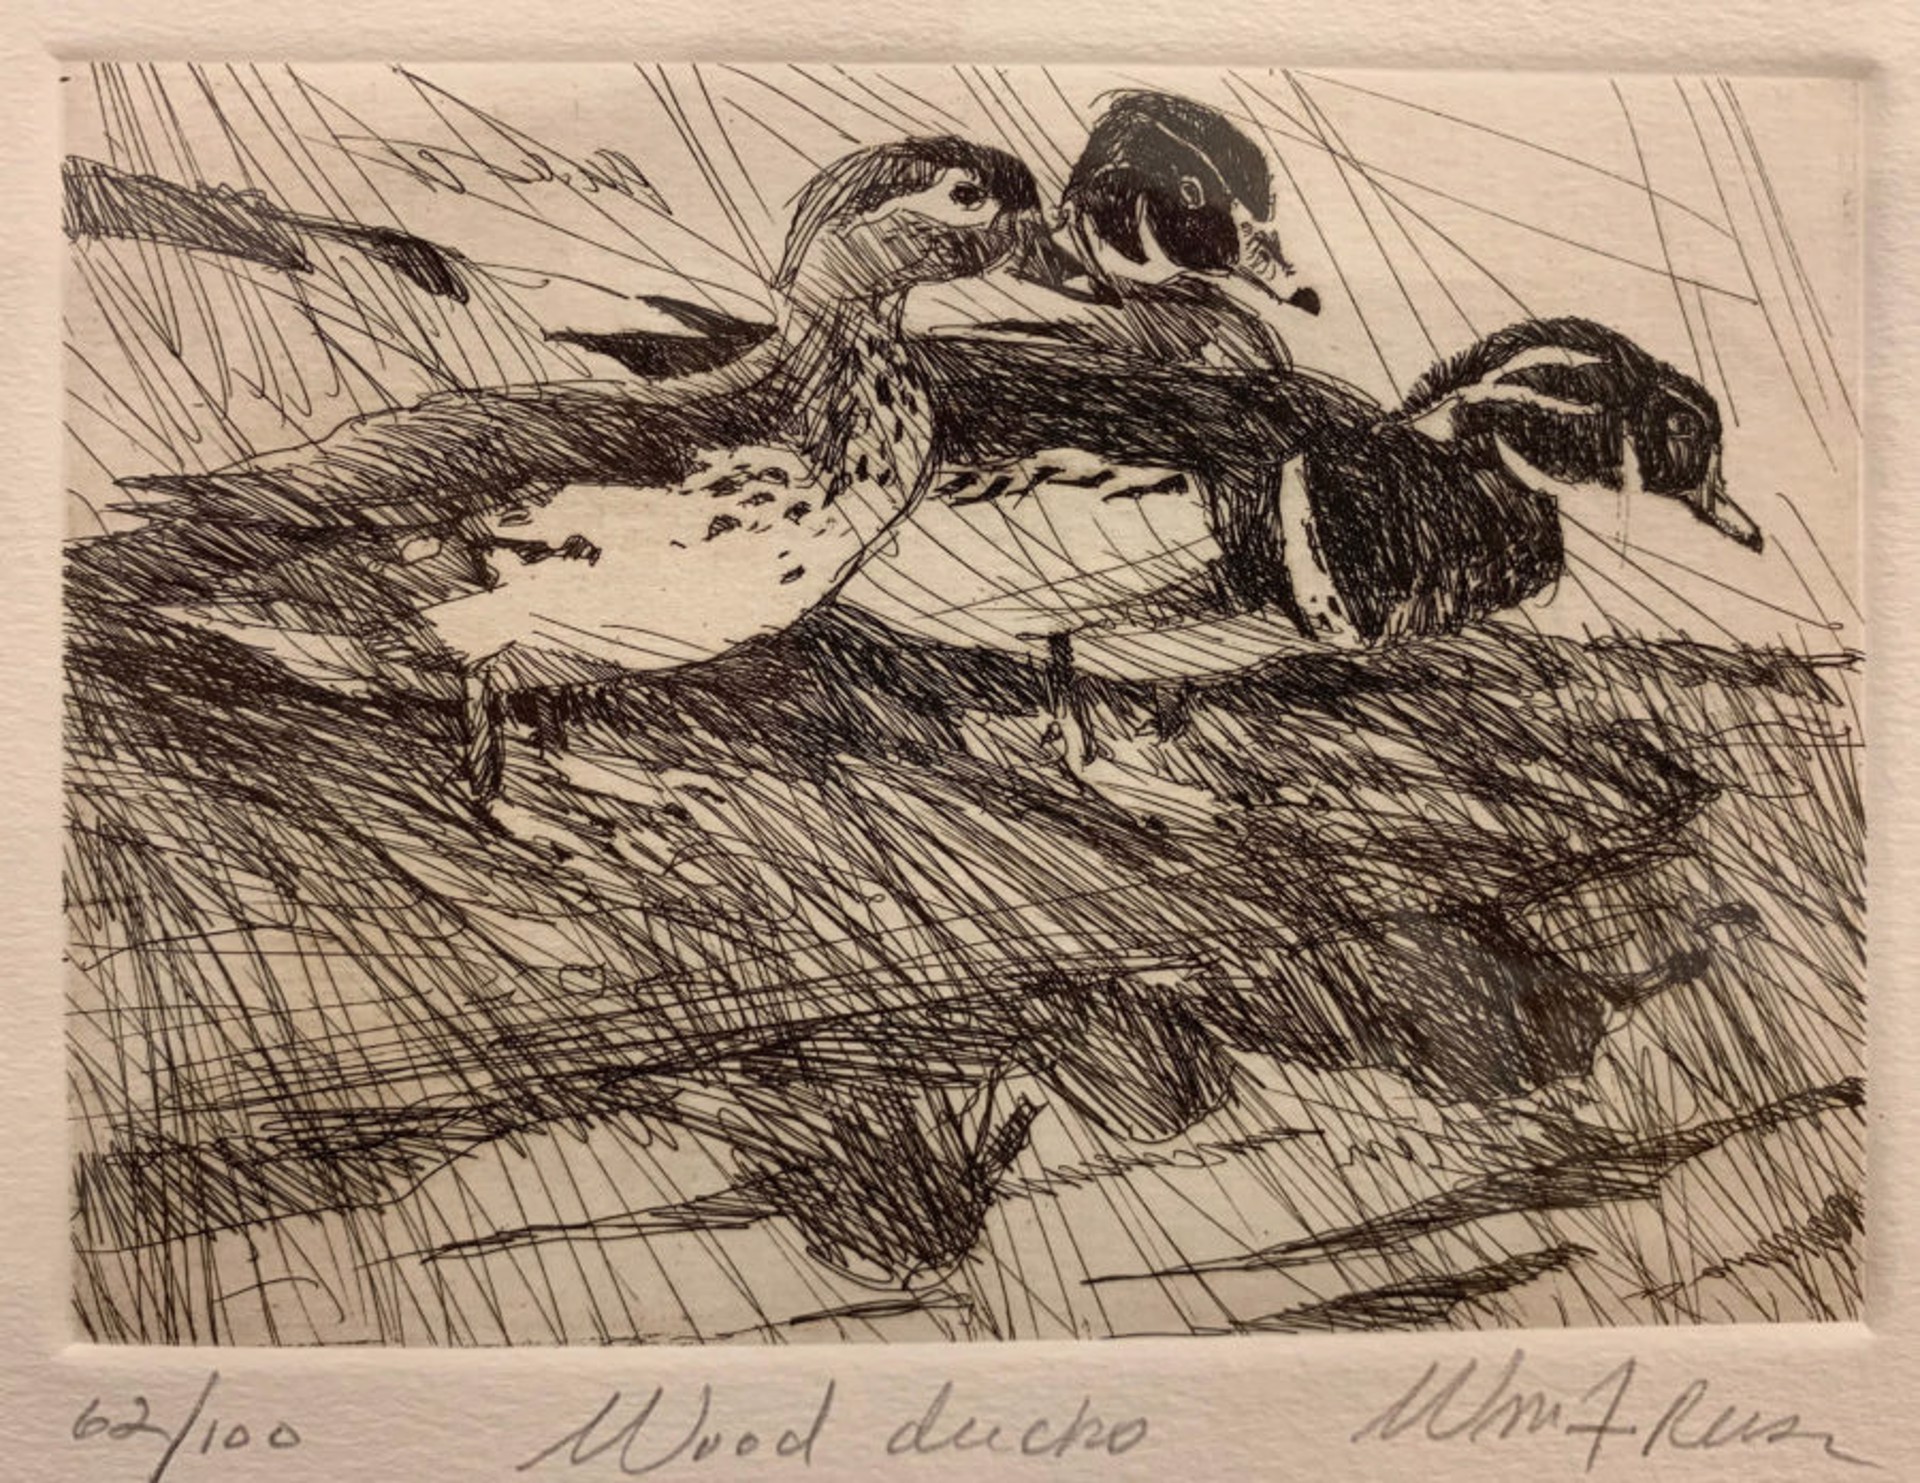 Wood Ducks 62/100 by William F. Reese